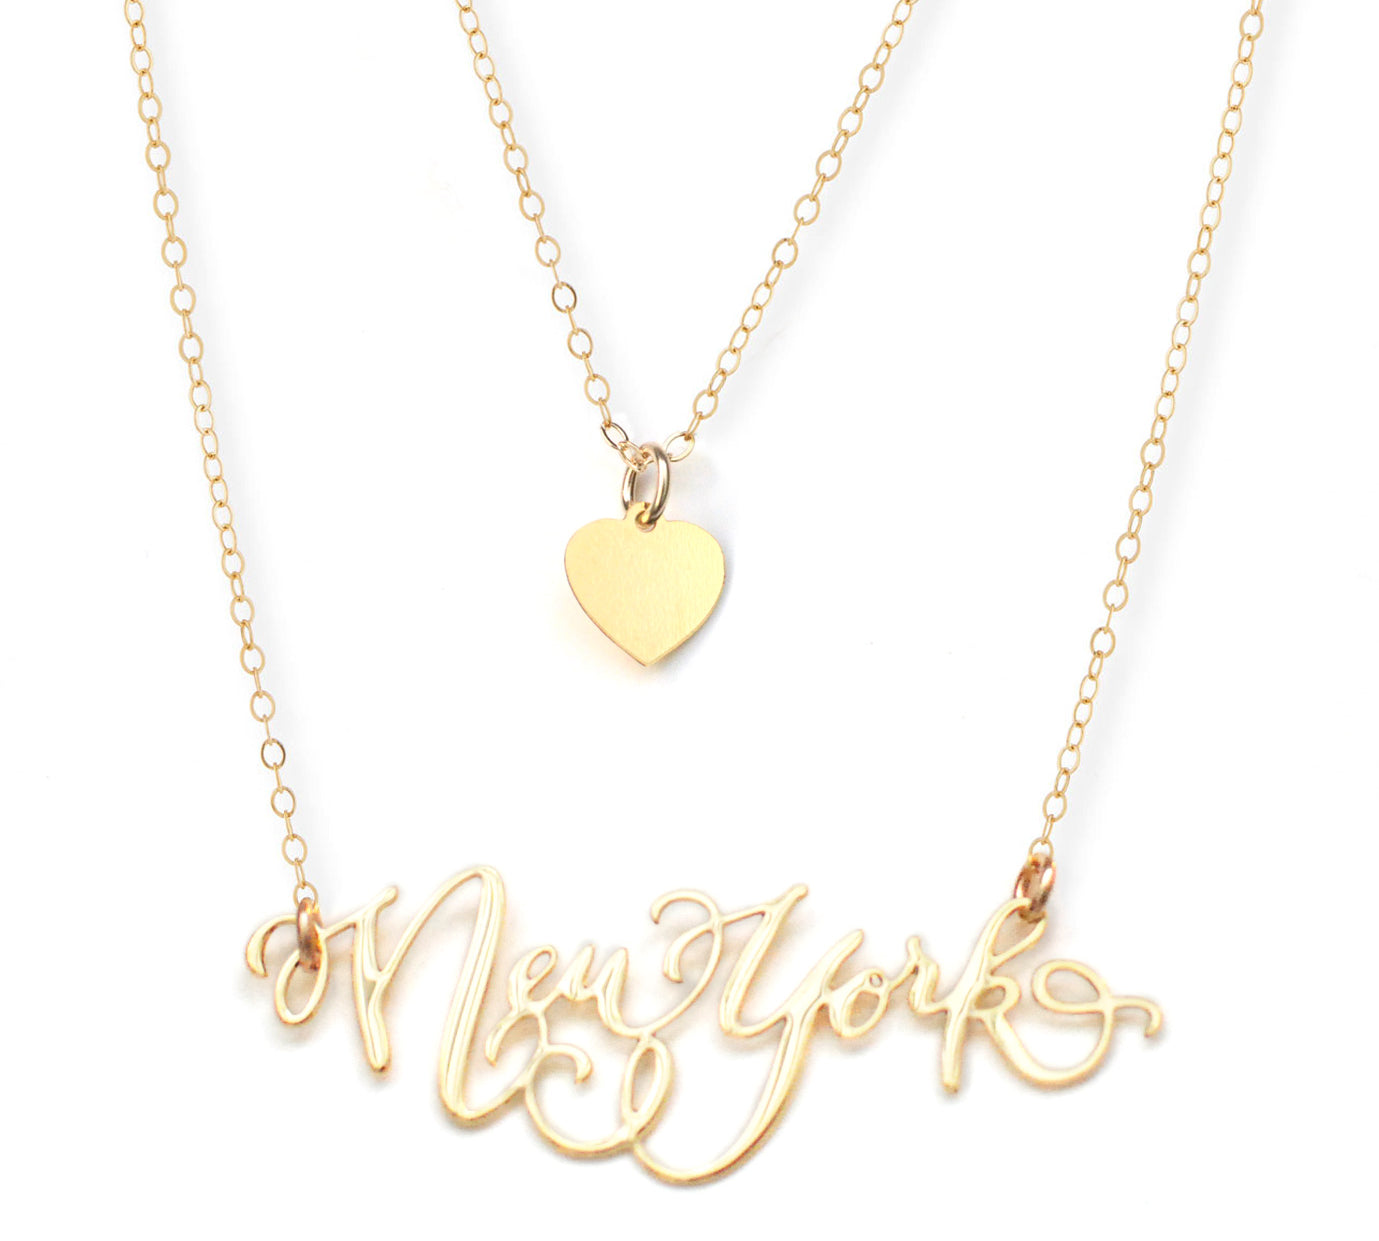 I Heart...Gift Set - High Quality, Hand Lettered, Calligraphy, City Gift Set Necklaces - Featuring a Dainty Heart and Your Favorite City - New York, Brooklyn, Atlanta, Austin, Boston, Chicago, Columbus, Denver, Houston, Los Angeles, Memphis, Minneapolis, Nantucket, Portland, San Diego, San Francisco, Seattle, Texan, Washington - Available in Gold and Silver - Made in USA - Brevity Jewelry